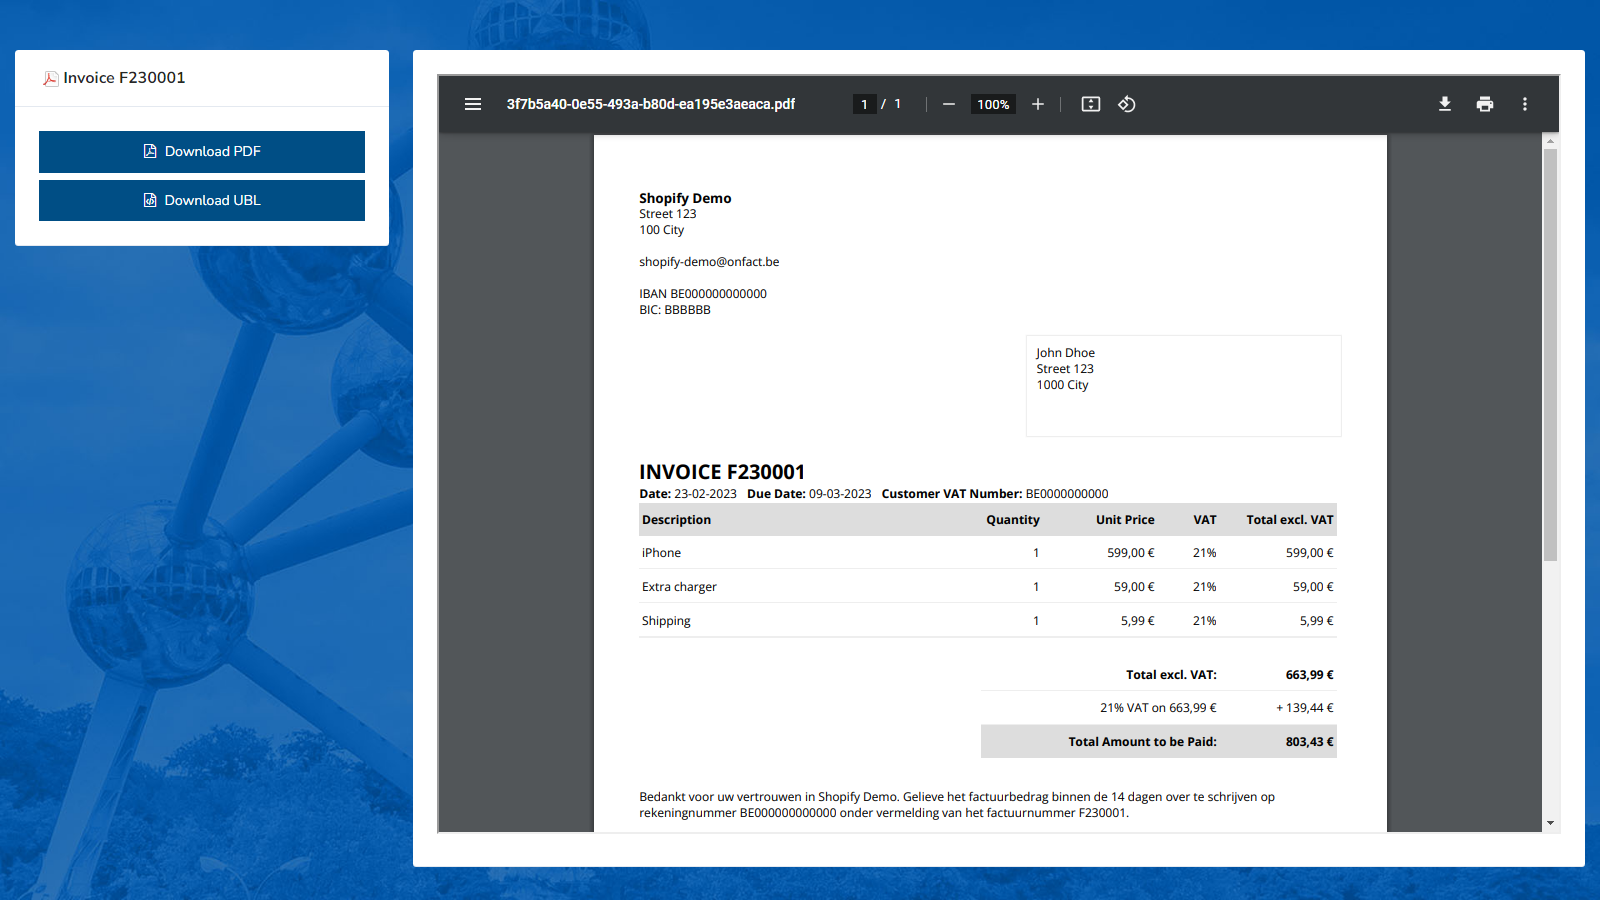 A sample generated invoice